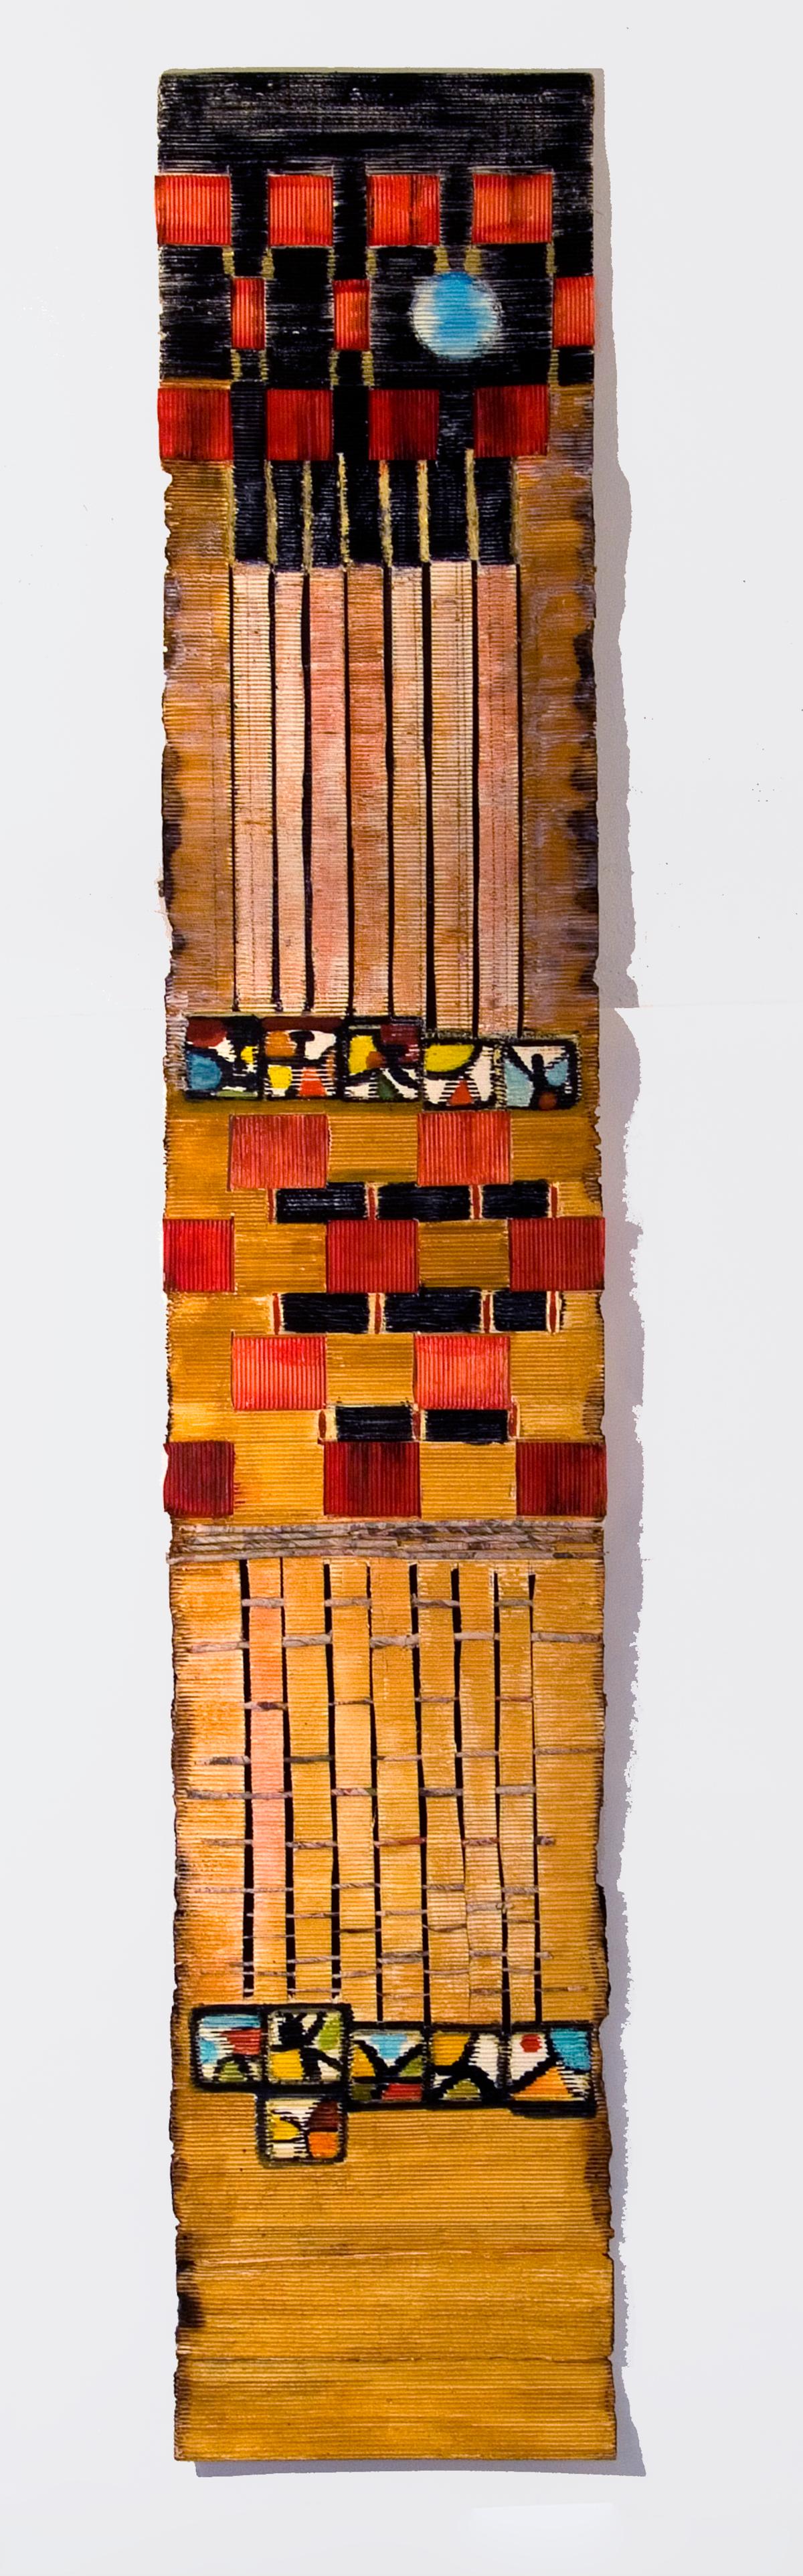 Joan Giordano Abstract Sculpture – "Ode to Miro" Handmade Paper, Mixed Media, Wall Relief Sculpture, Vertical